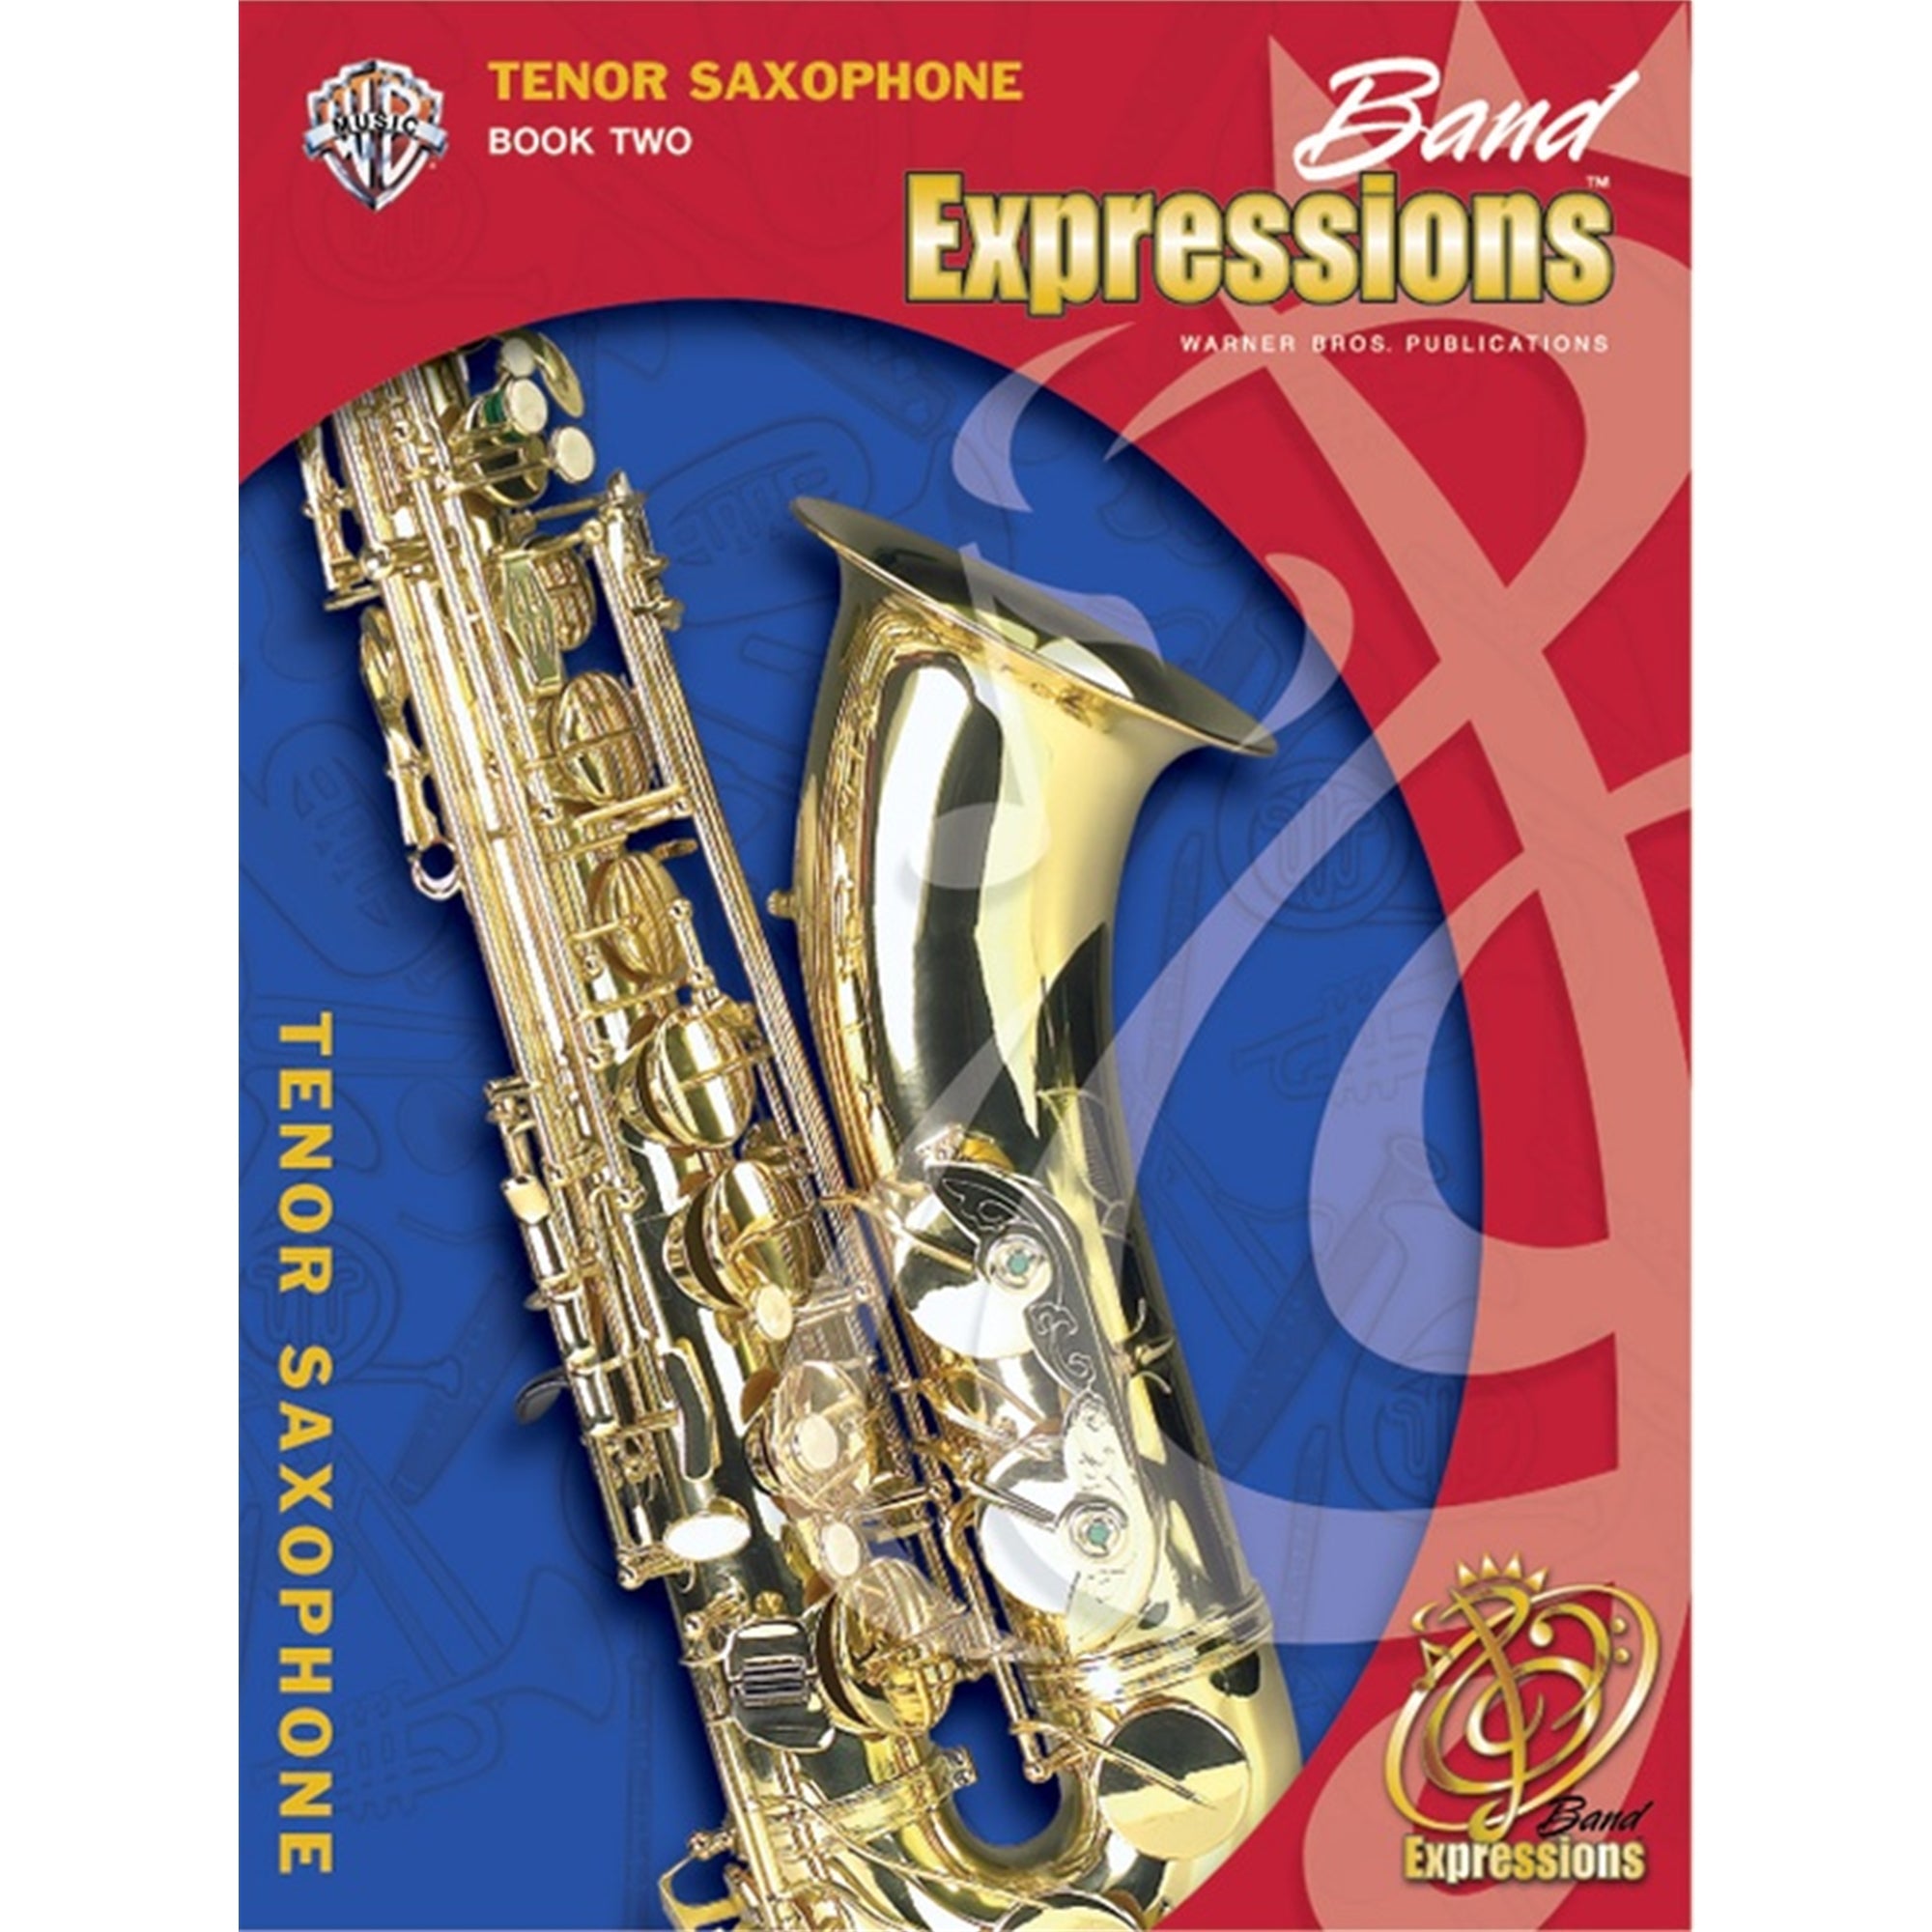 ALFRED 00EMCB2009CD Band Expressions , Book Two: Student Edition [Tenor Saxophone]